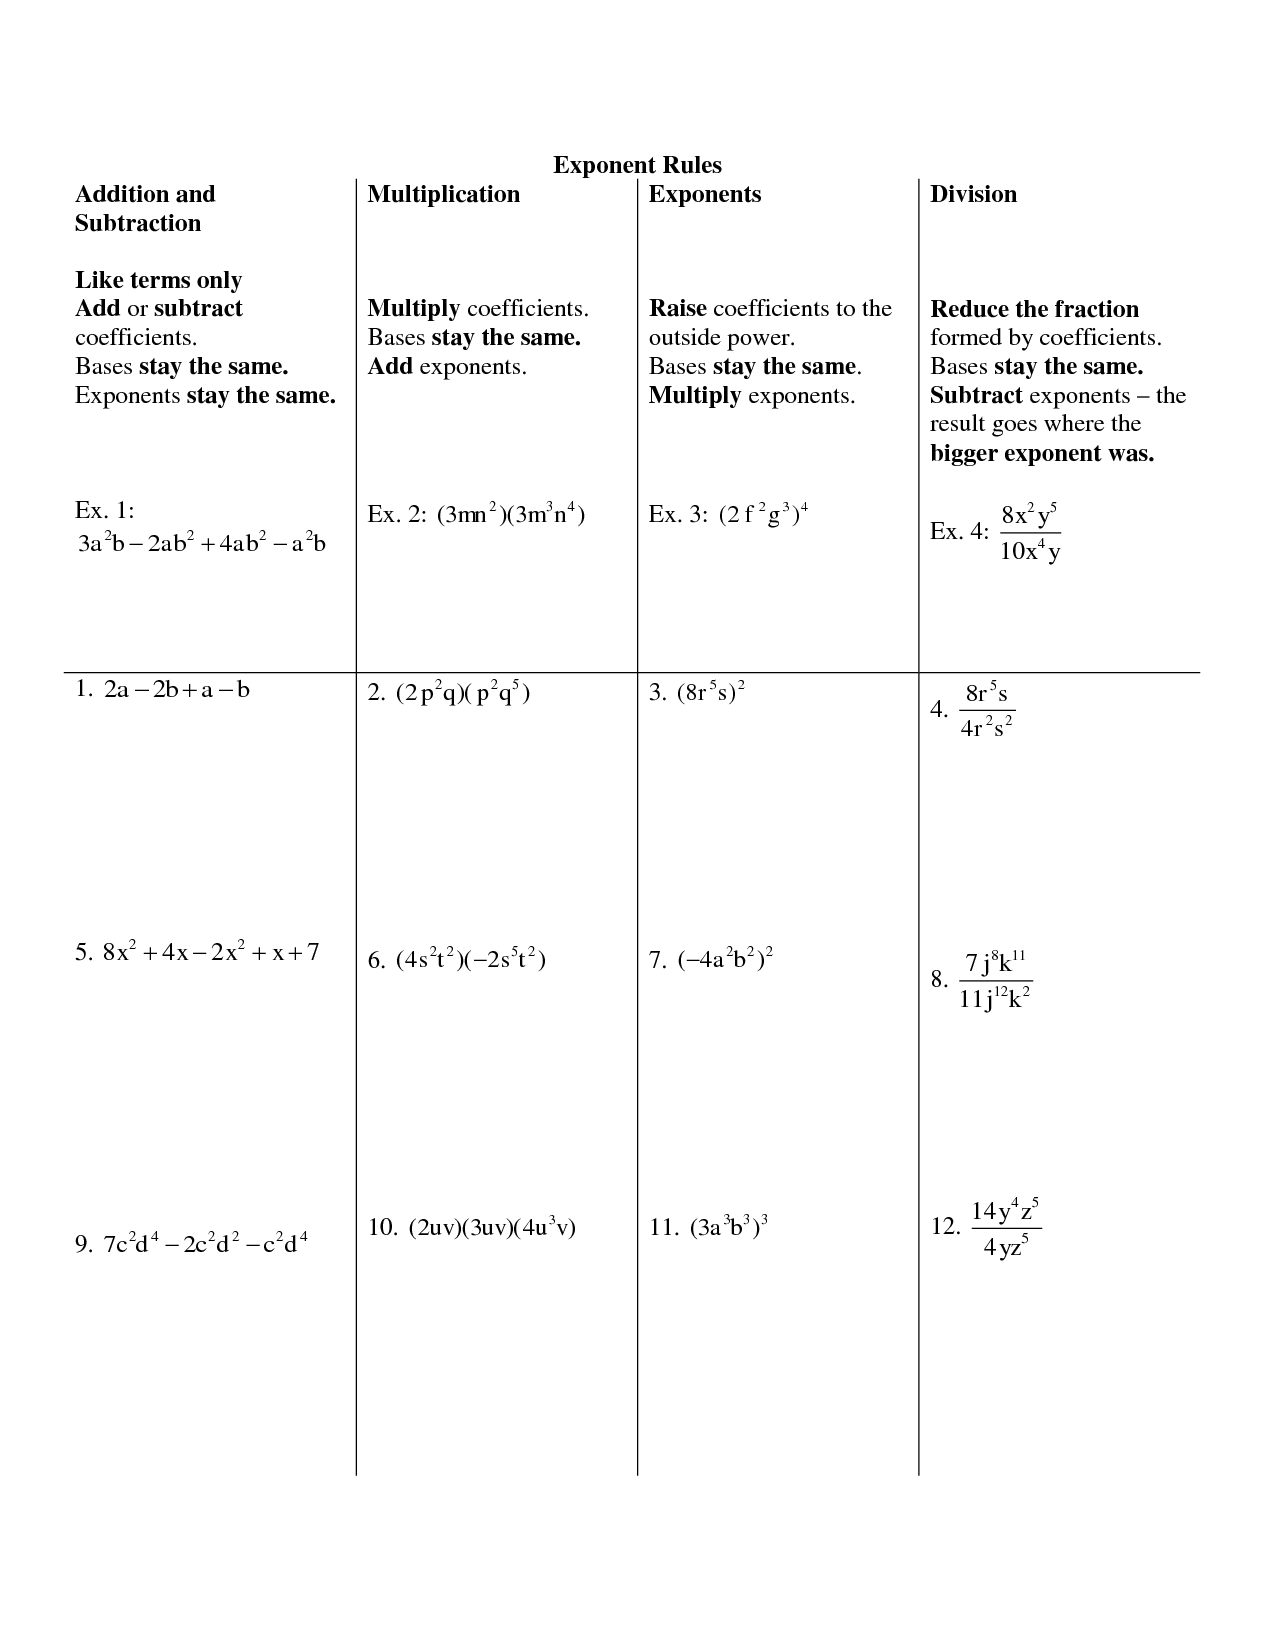 Multiplication and Division Worksheets with Exponents Image